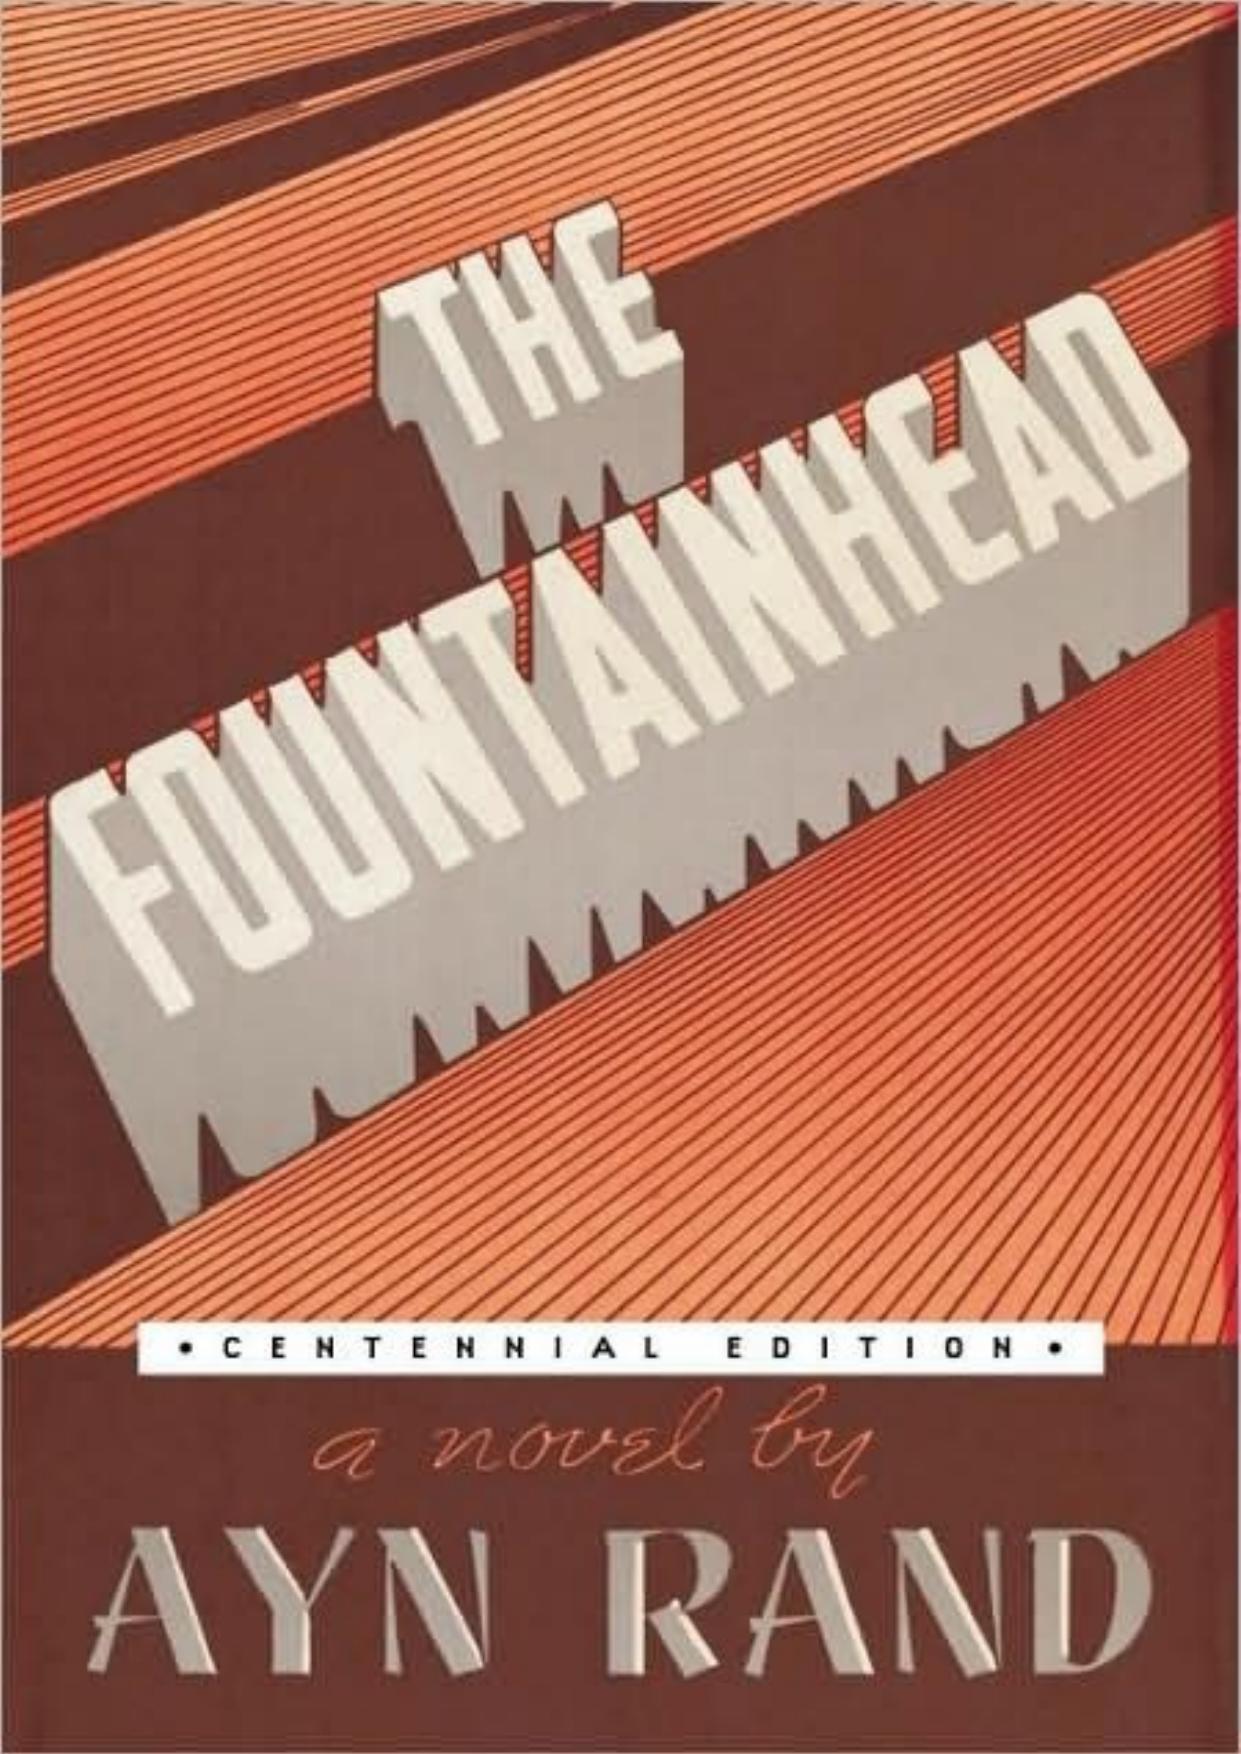 The Fountainhead by Ayn Rand free ebooks download